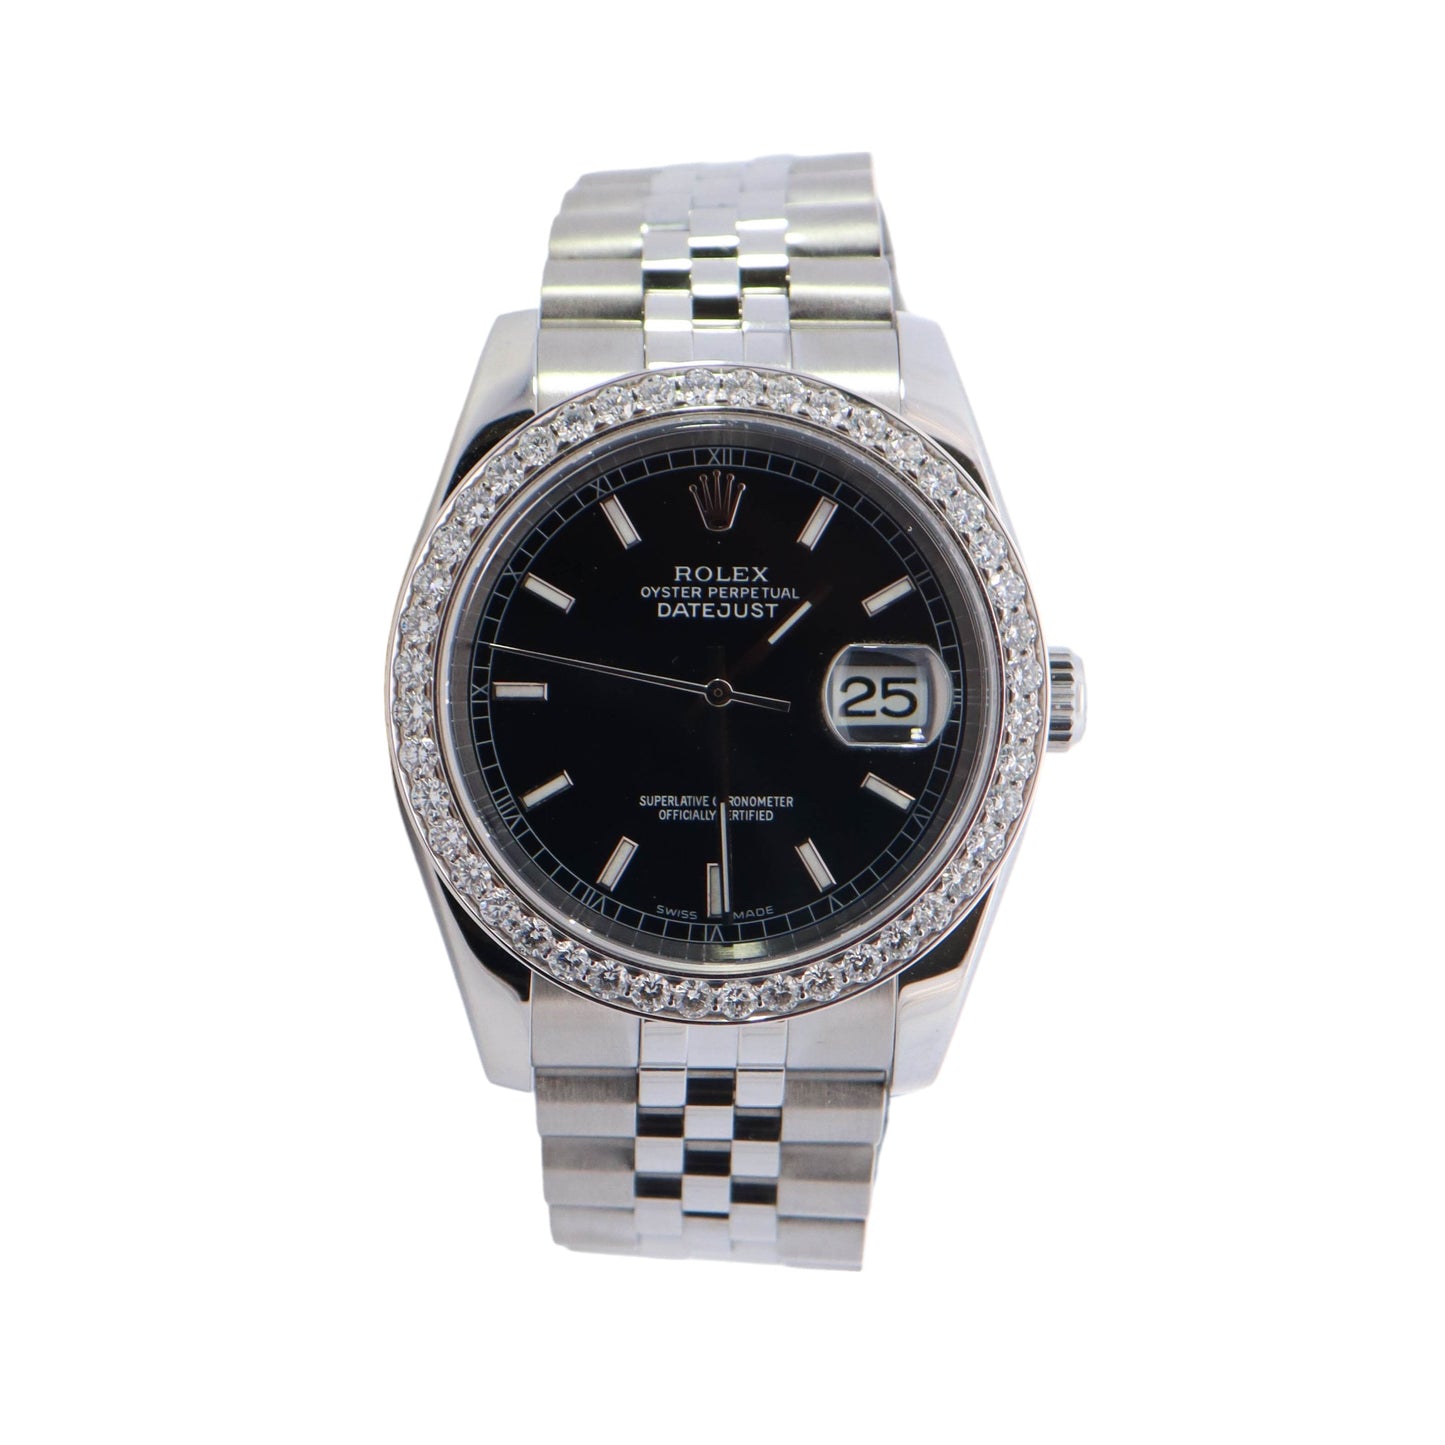 Rolex Datejust Stainless Steel 36mm Black Stick Dial Watch Reference #: 116234